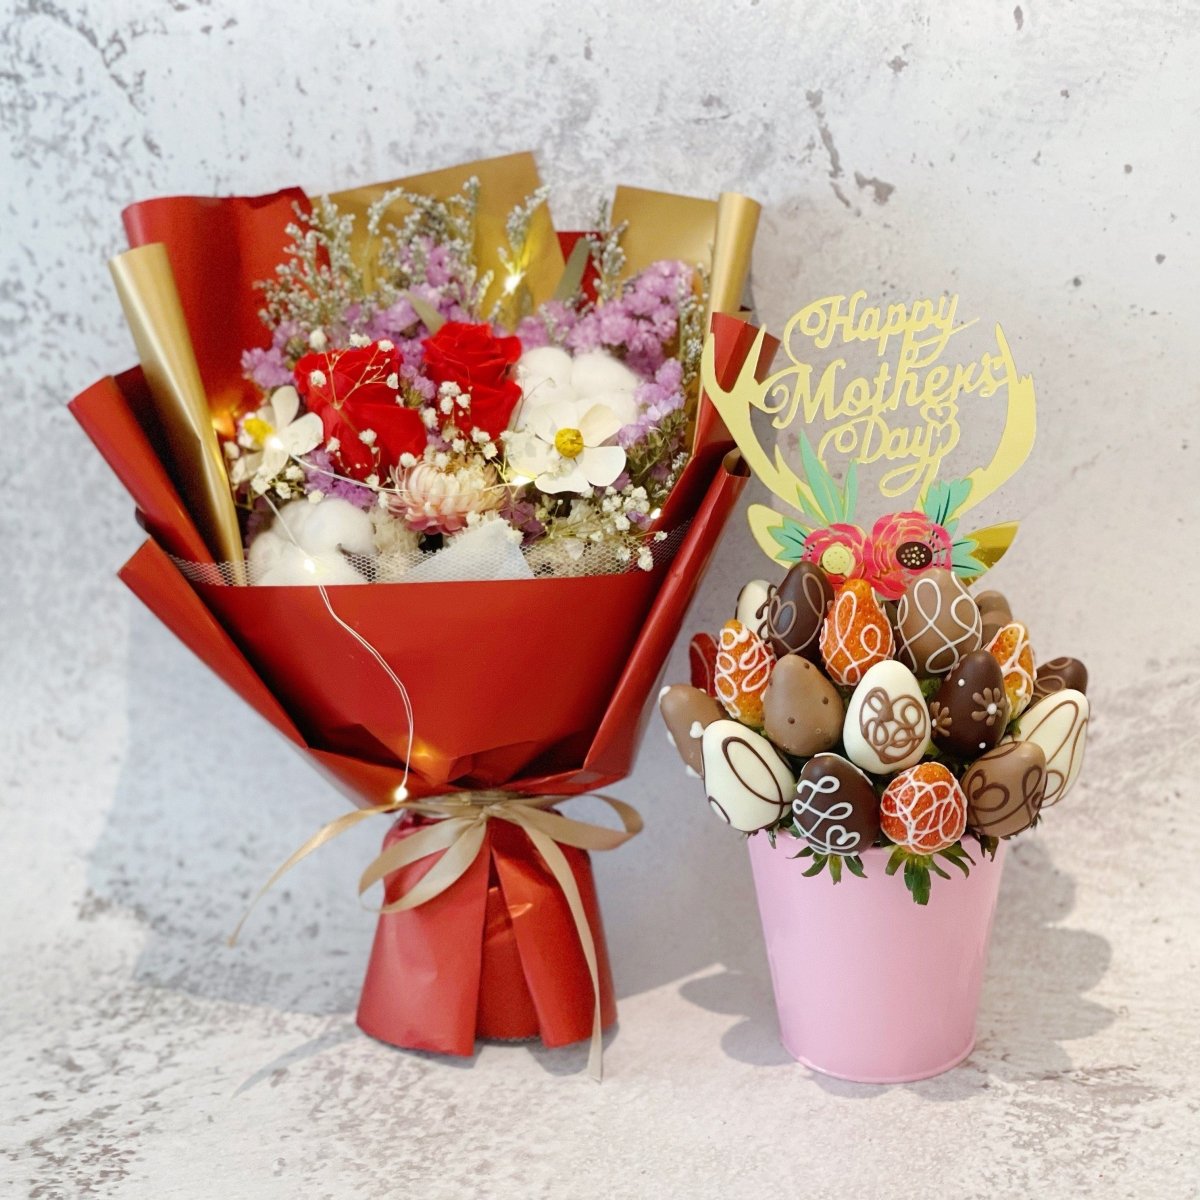 Mother's Day Bundle Deal - Everlasting & All About You - Fresh Chocolate Dipped Strawberry Fruit Bouquet Arrangement Pot (Random Topper) - Rainbowly Fresh Fruit Gift and Flower Arrangments